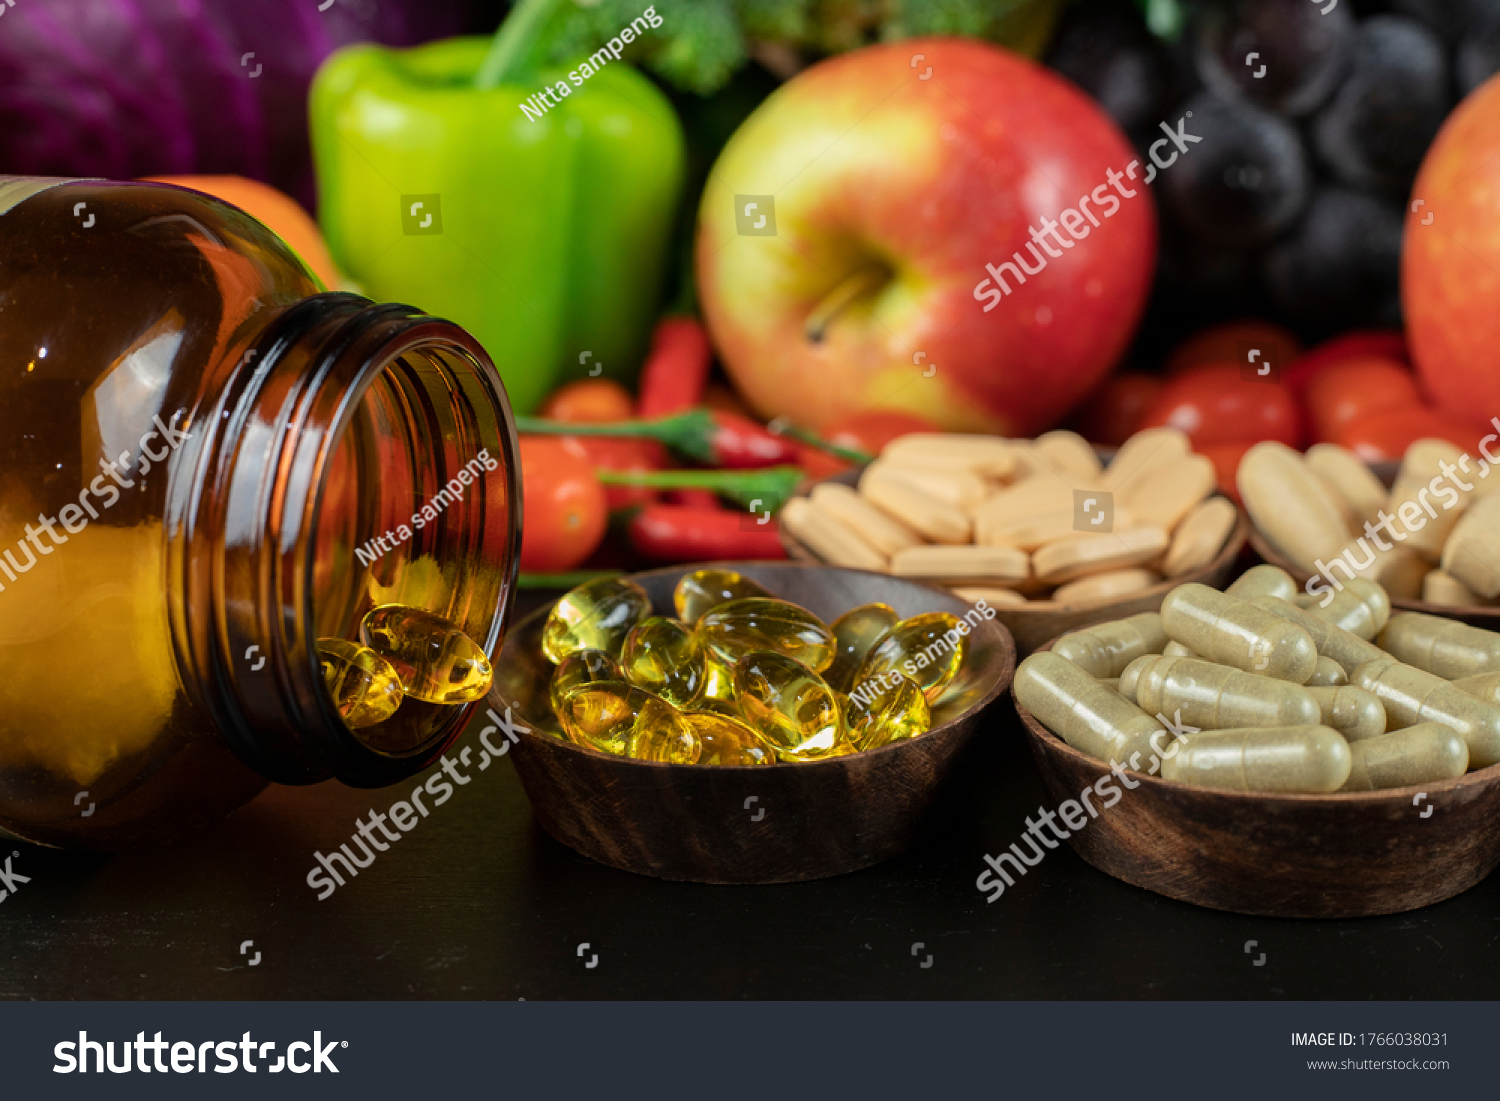 Glass of bottle with food supplement on fruits and vegetables background . Health concept. #1766038031